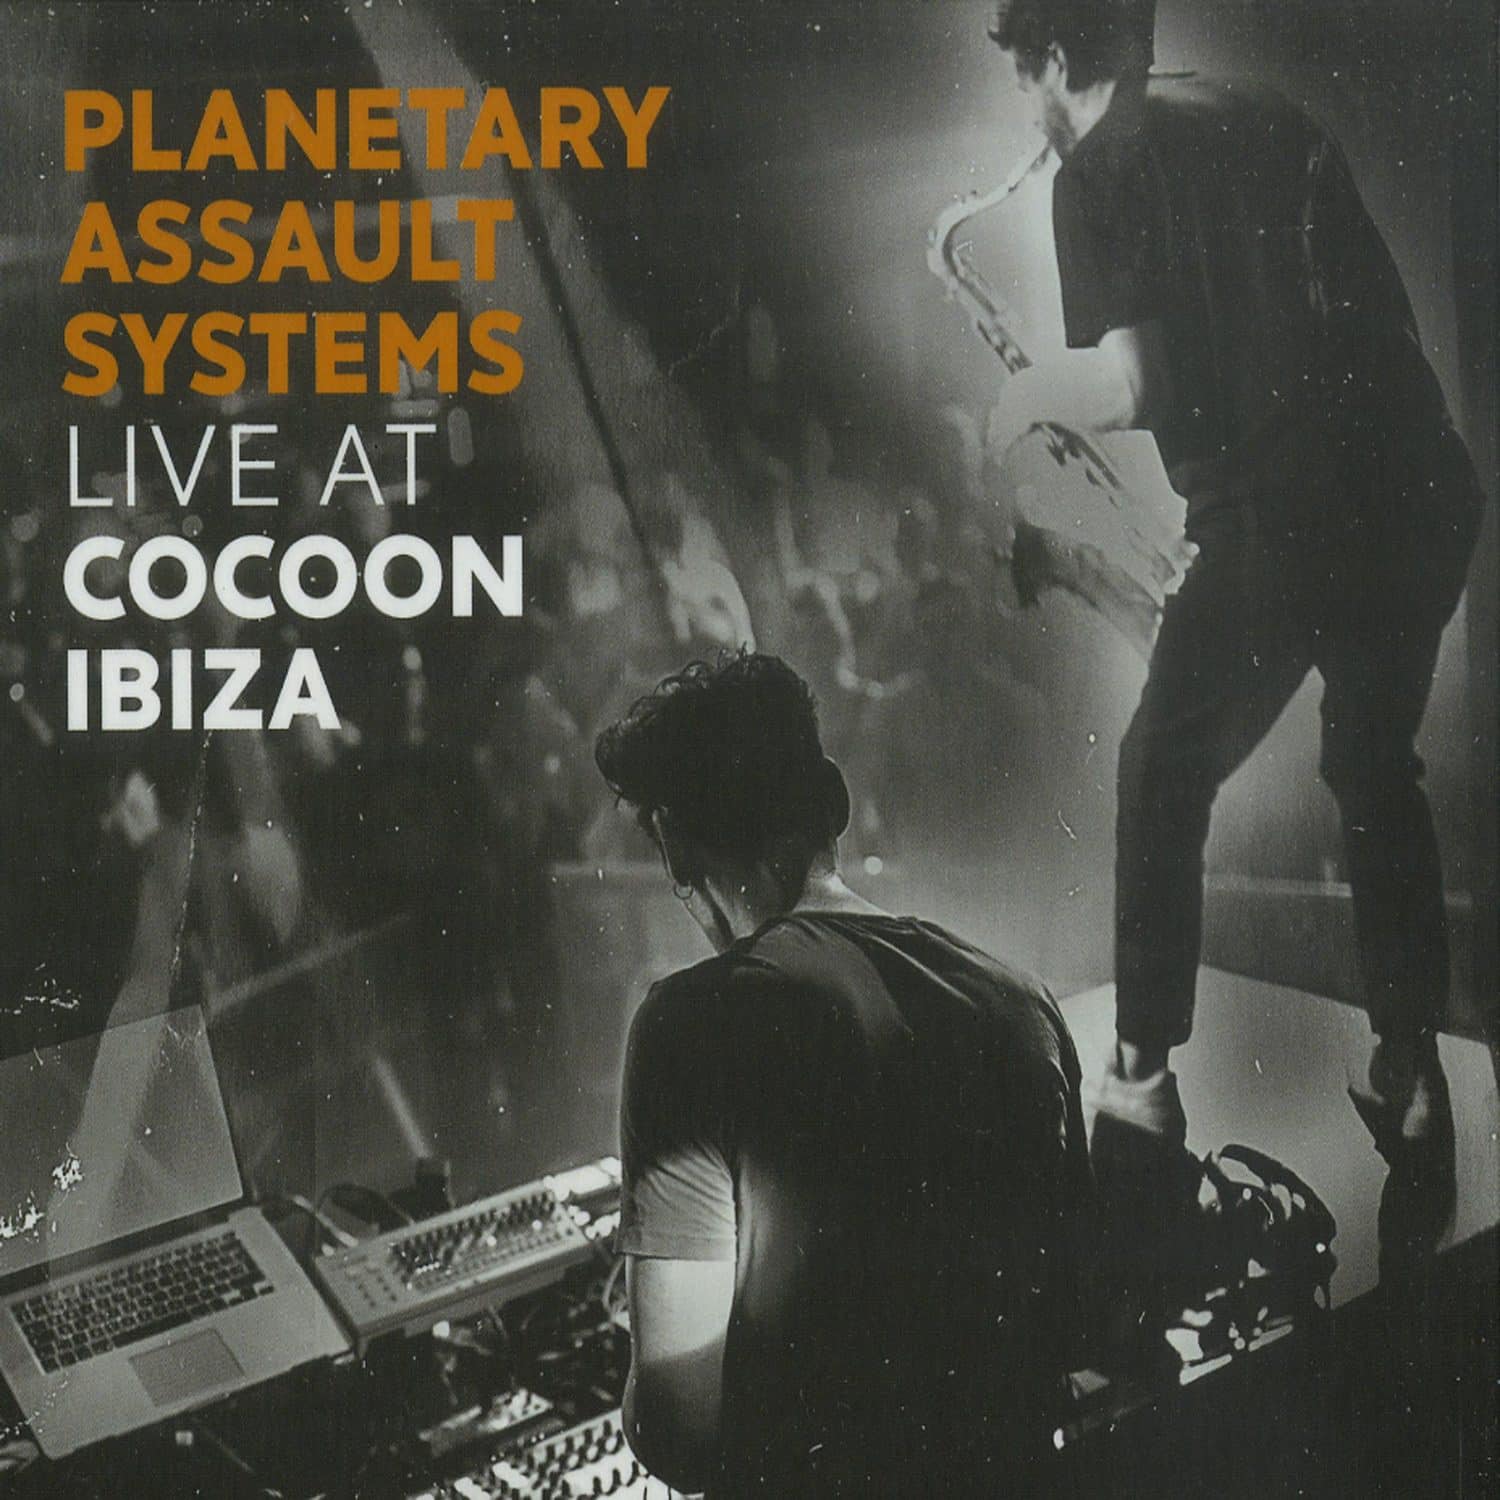 Planetary Assault Systems - LIVE AT COCOON IBIZA 